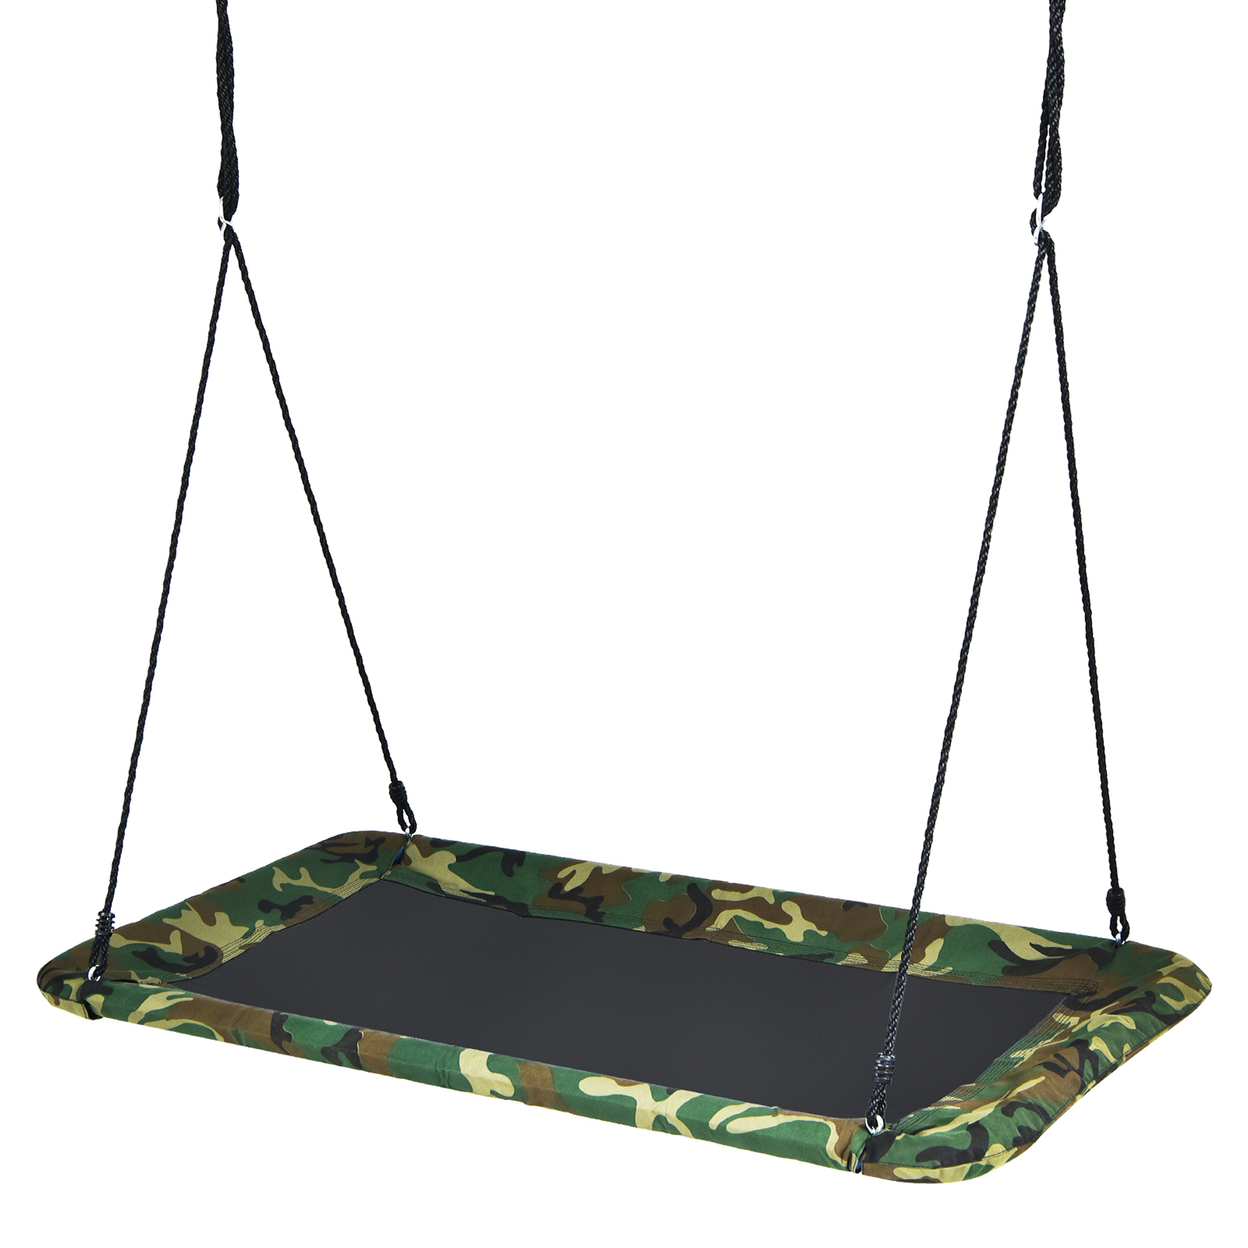 60'' Kids Giant Tree Rectangle Swing 700 Lbs W/ Adjustable Hanging Ropes - Camo Green